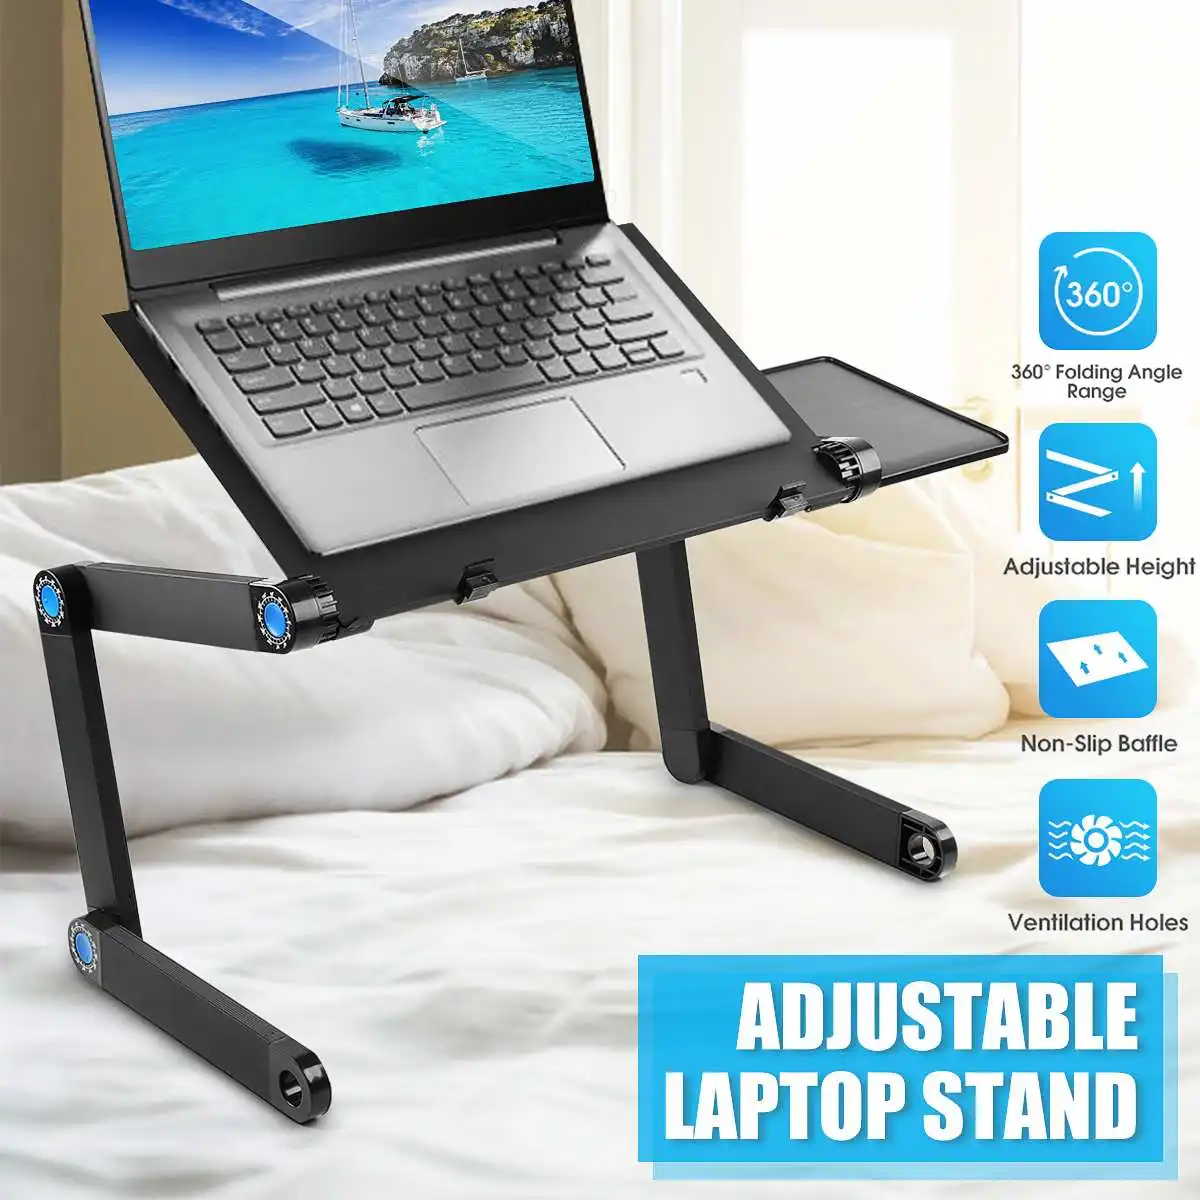 

Aluminum Laptop Folding Table Computer Desk Stand for Bed 360 Degree Rotation MultiFunctional Portable Table 52.5x26.4x5cm